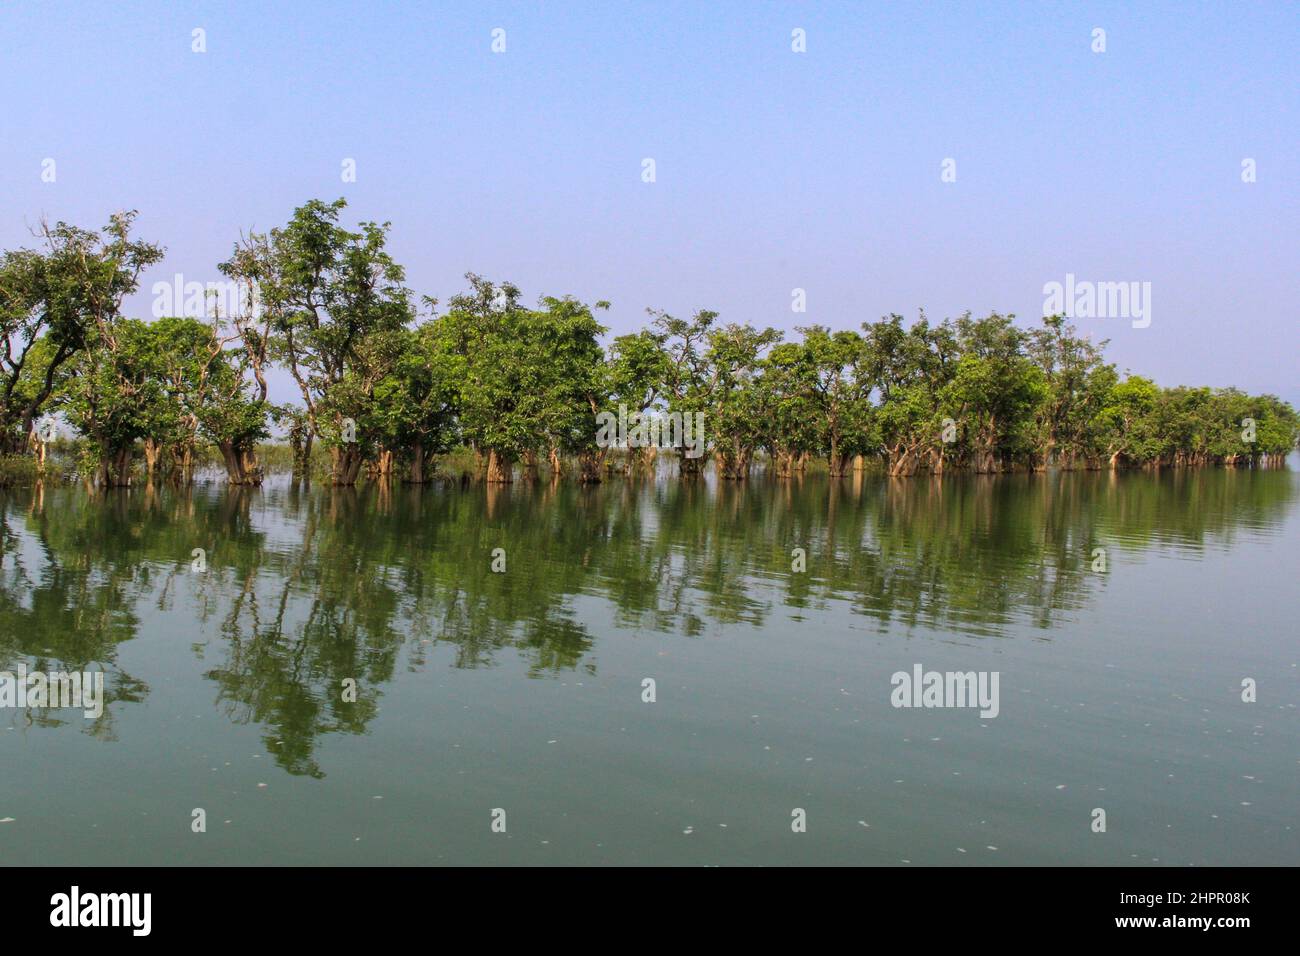 Beautiful trees reflecting on the water Stock Photo